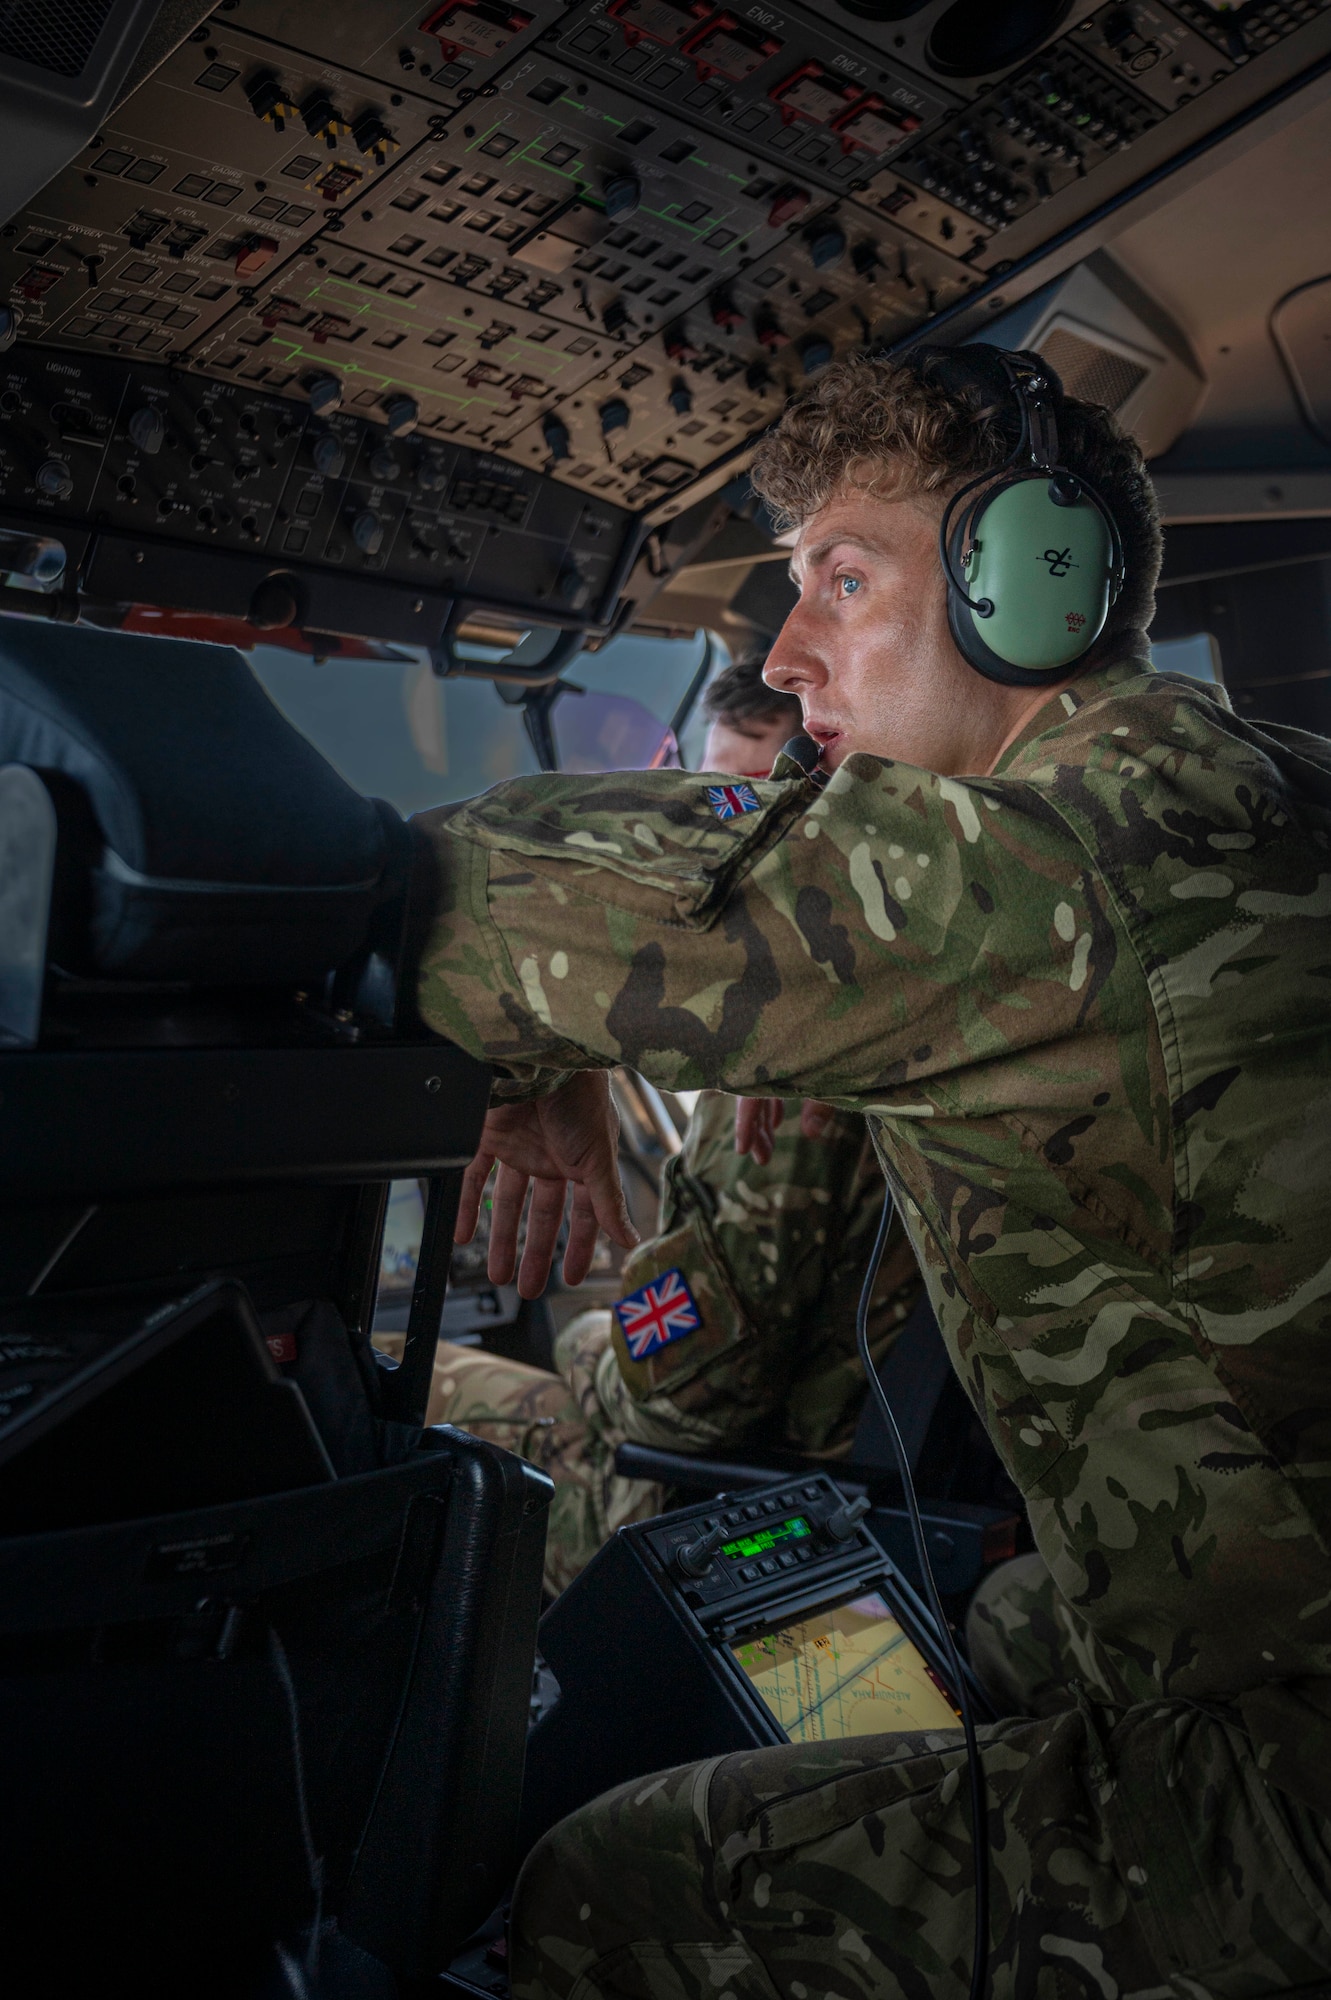 Royal Air Force Flight Lt. Rob Hughes looks out the window of a Royal Air Force A400M Atlas during a familiarization flight over Hawaii during Mobility Guardian 23, July 10, 2023. MG23 features seven participating countries - Australia, Canada, France, Japan, New Zealand, United Kingdom, and the United States - operating approximately 70 mobility aircraft across multiple locations spanning a 3,000 mile exercise area. Our Allies and partners are one of our greatest strengths and a key strategic advantage. MG23 is an opportunity to deepen our connections with regional Allies and partners using bold initiatives. (U.S. Air Force photo by Senior Airman Tiffany Del Oso)